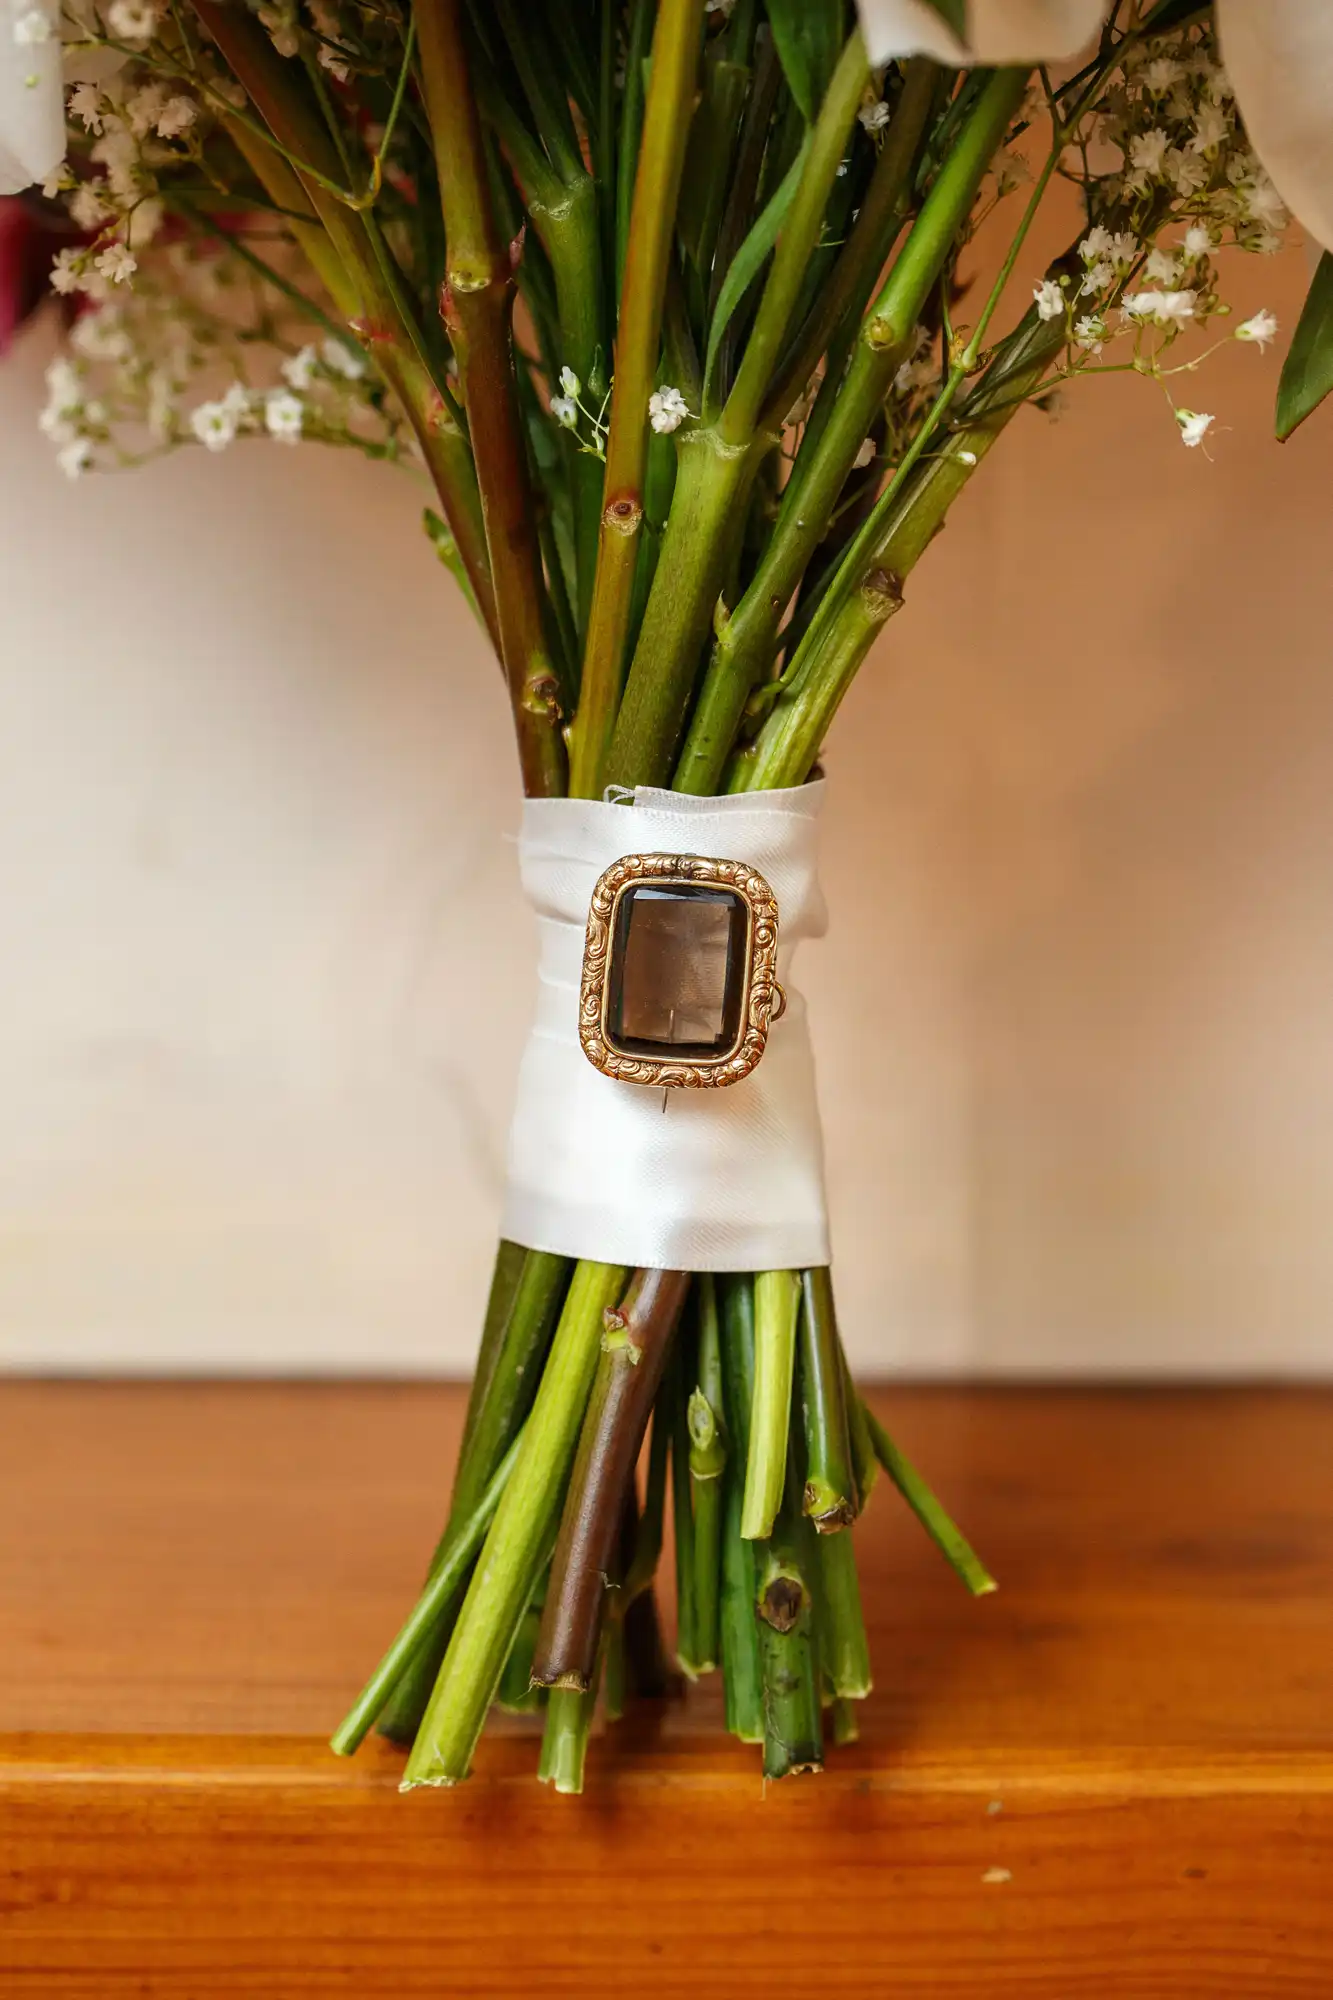 Bouquet of flowers tied with a white ribbon and embellished with a vintage cameo brooch, resting on a wooden surface.